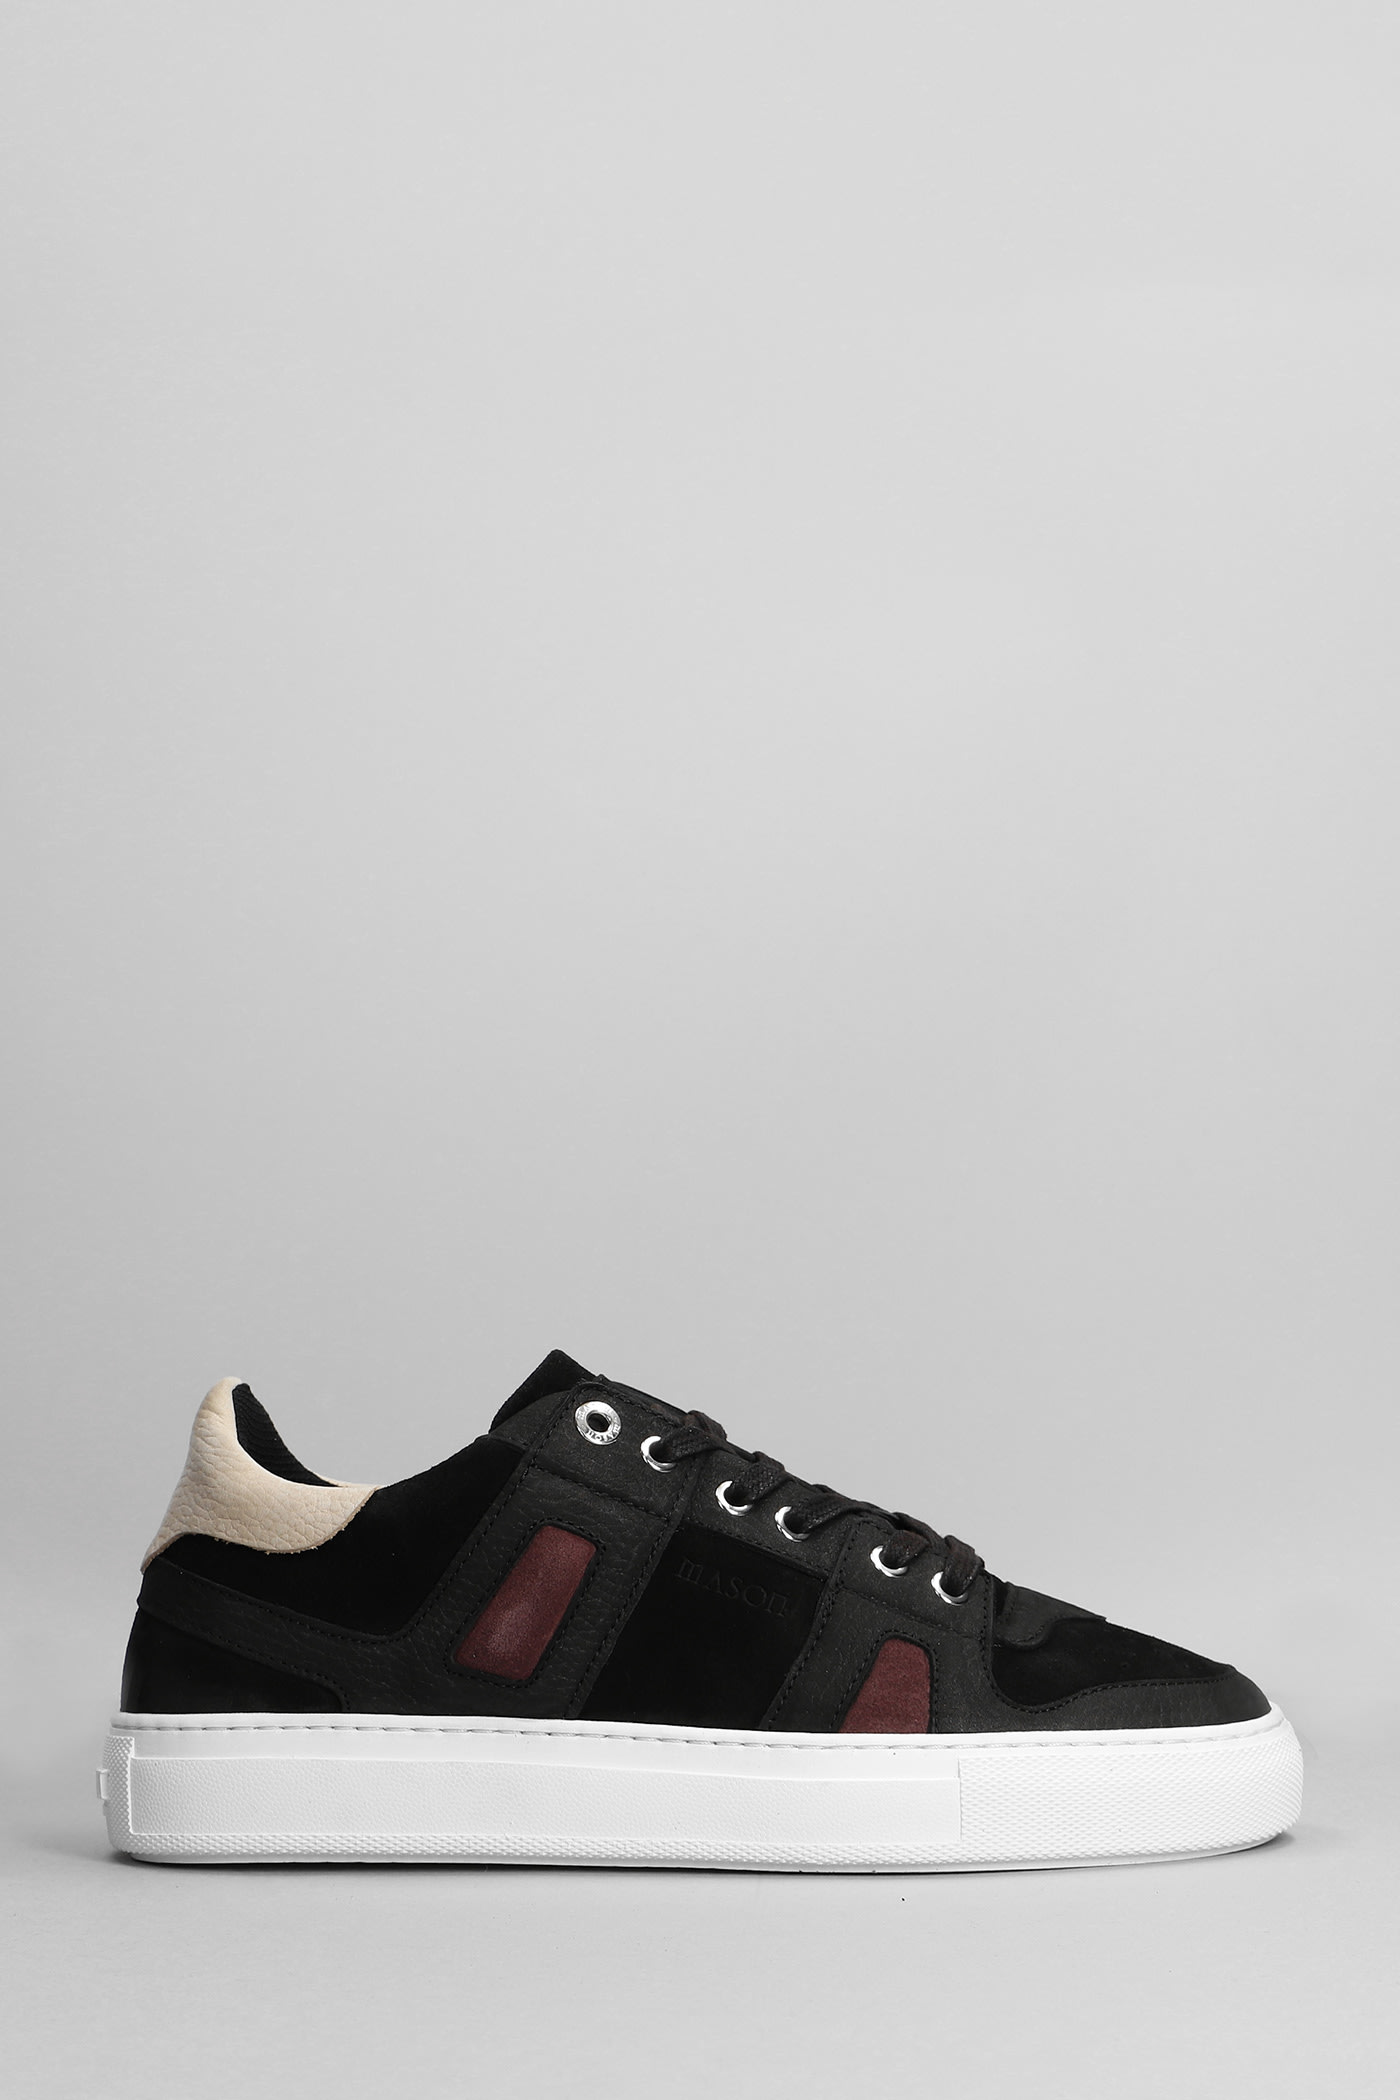 Mason Garments Bari Sneakers In Black Suede And Leather